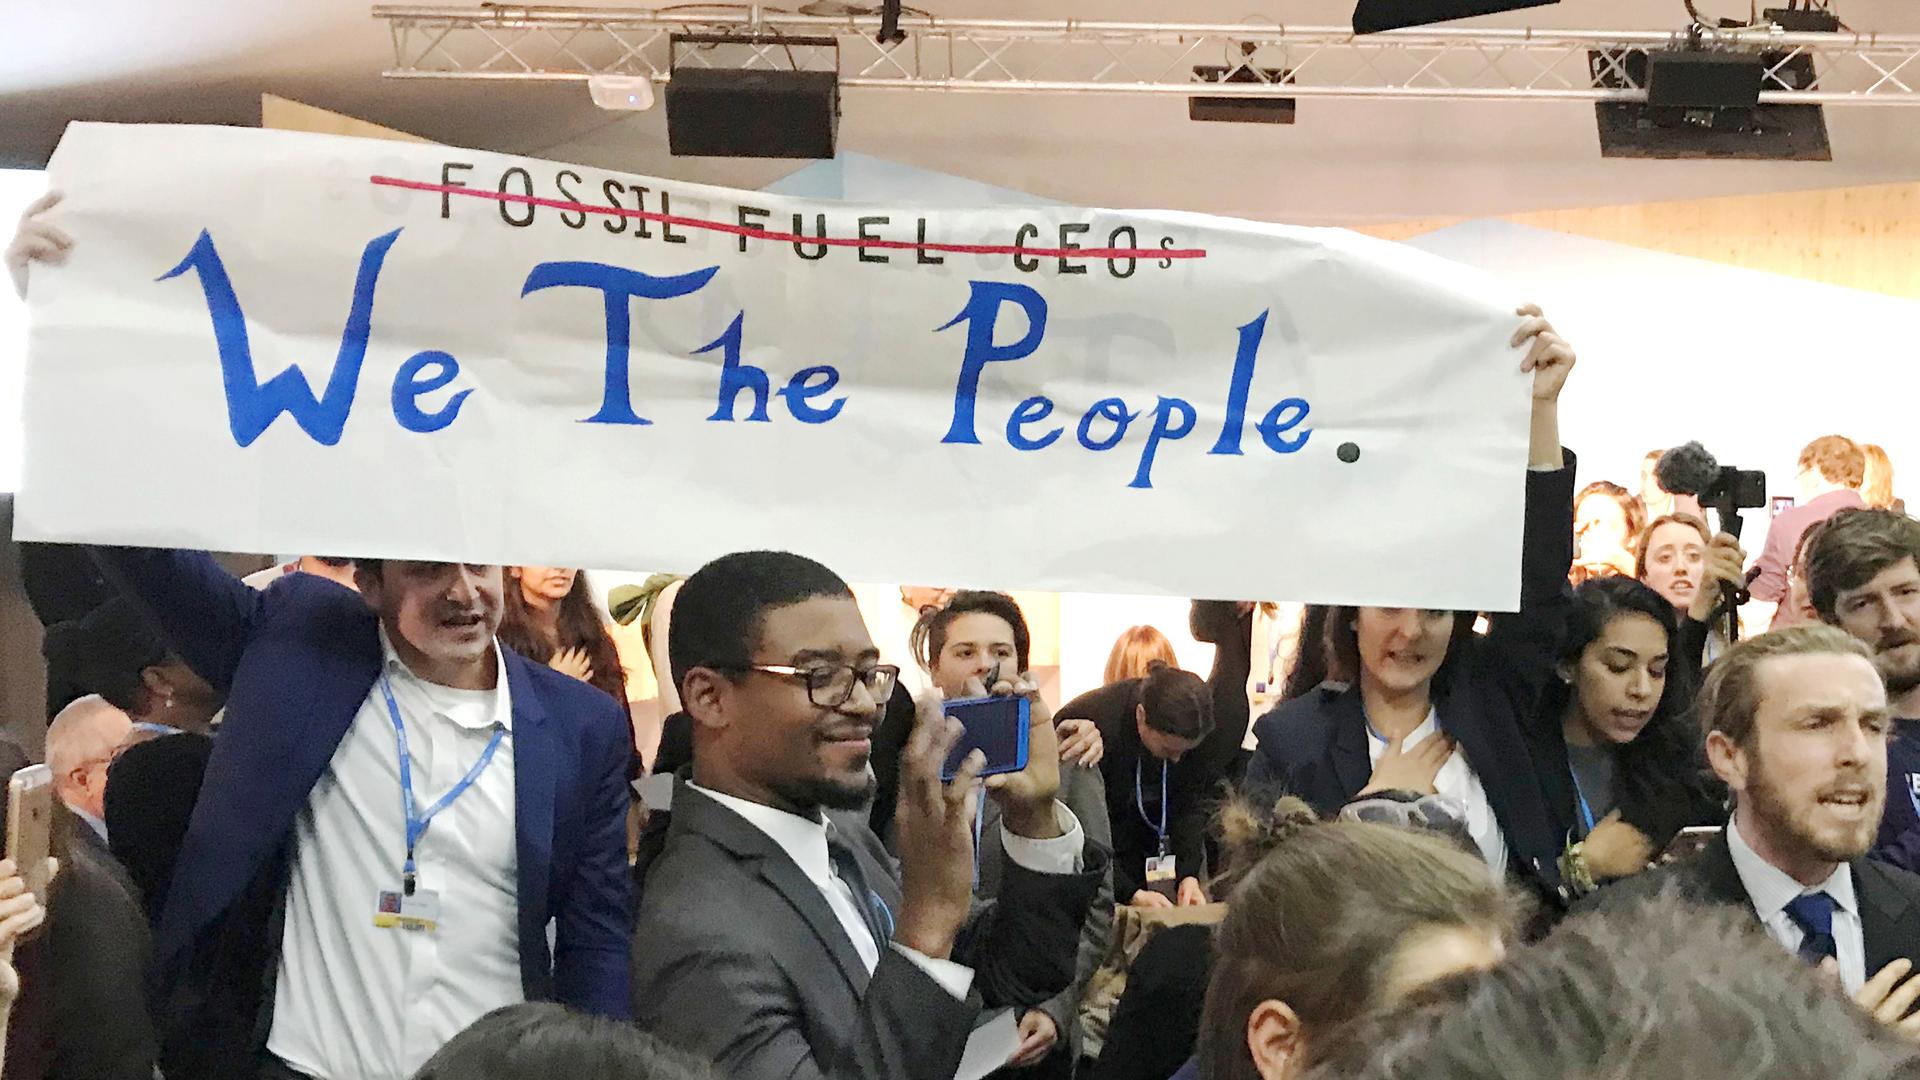 Protesters interrupt a U.S. government pro-coal event during this year's UN Climate Change Conference in Bonn, Germany. 